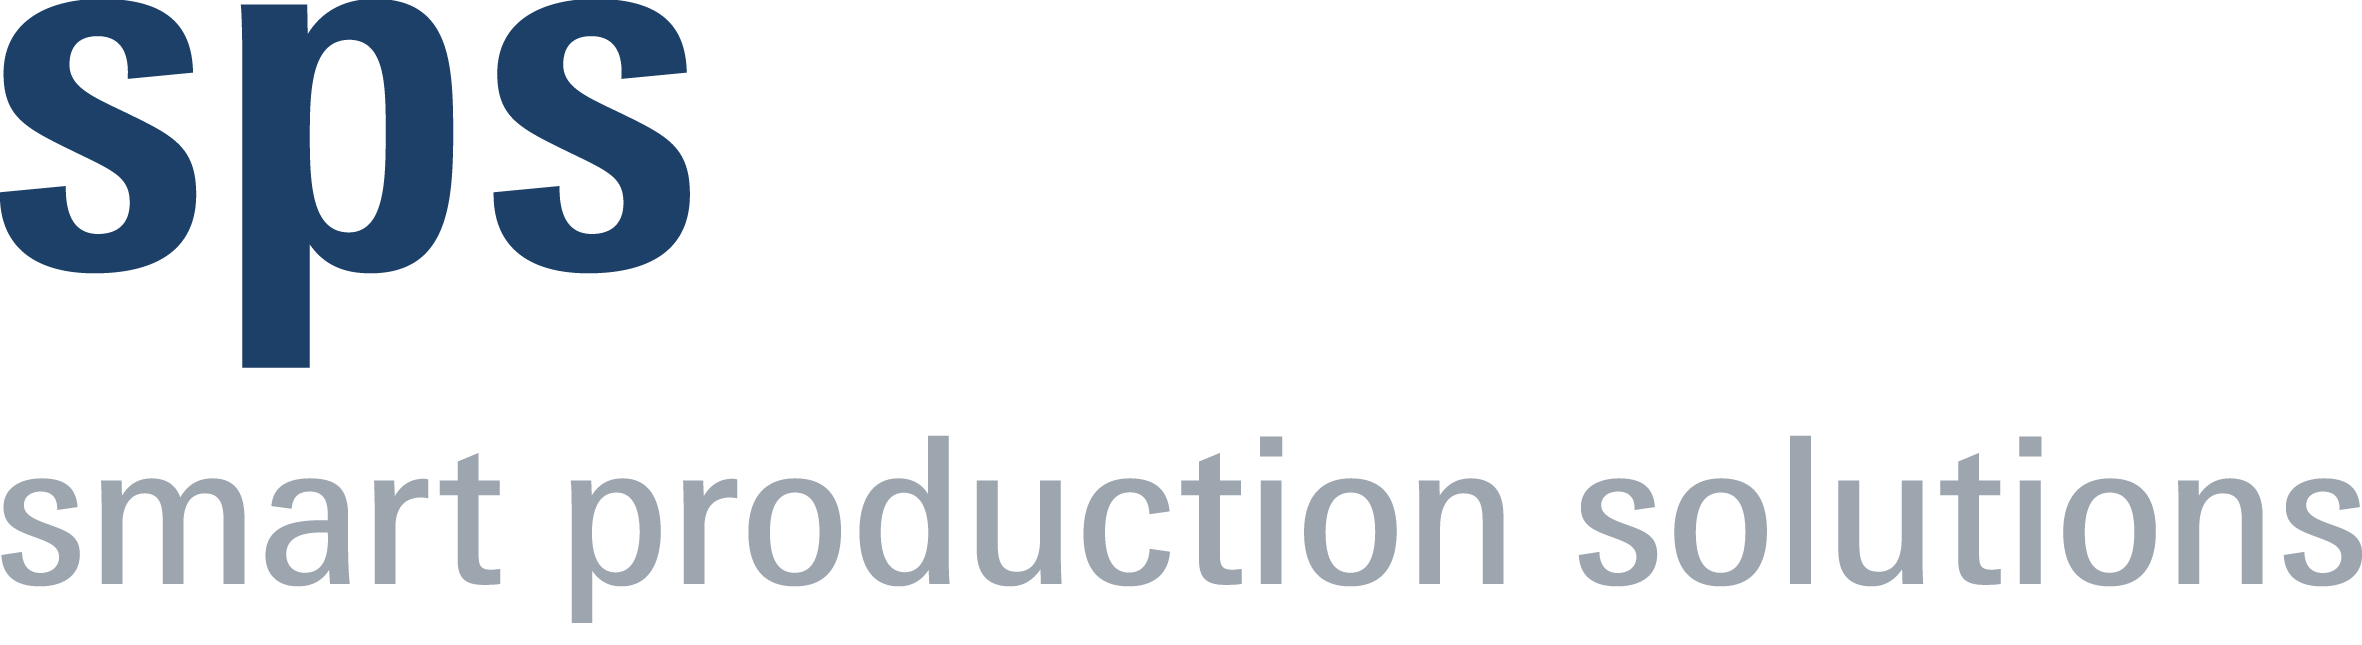 SPS Smart Production Solutions